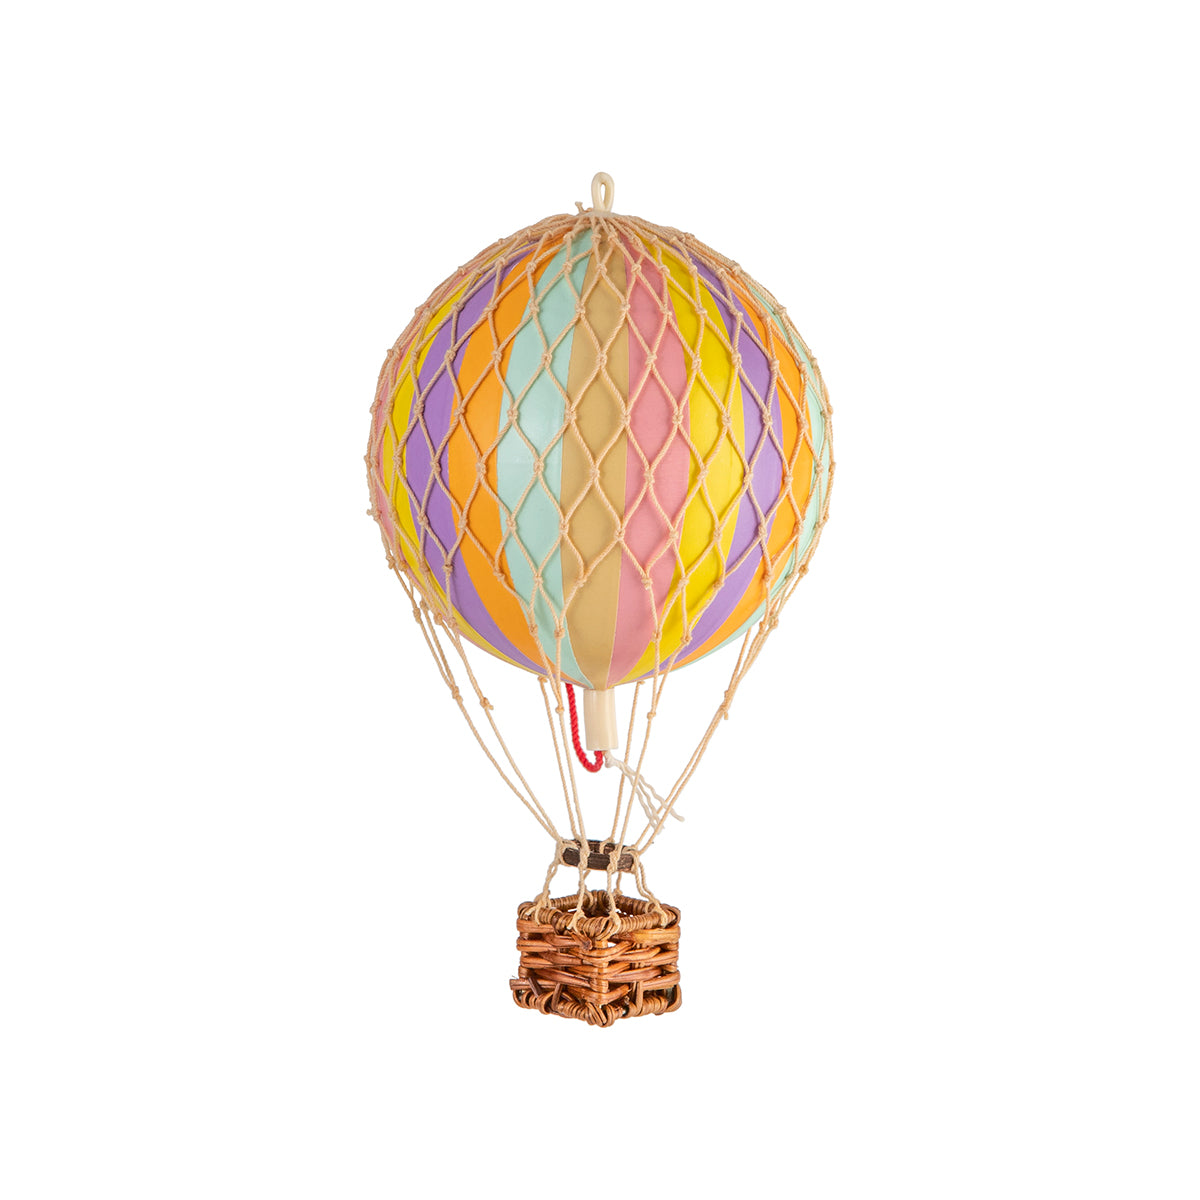 Embark on a whimsical journey in a Wonderen Extra Small Hot Air Balloon with a wicker basket produced by Wonderen Stroopwafels.